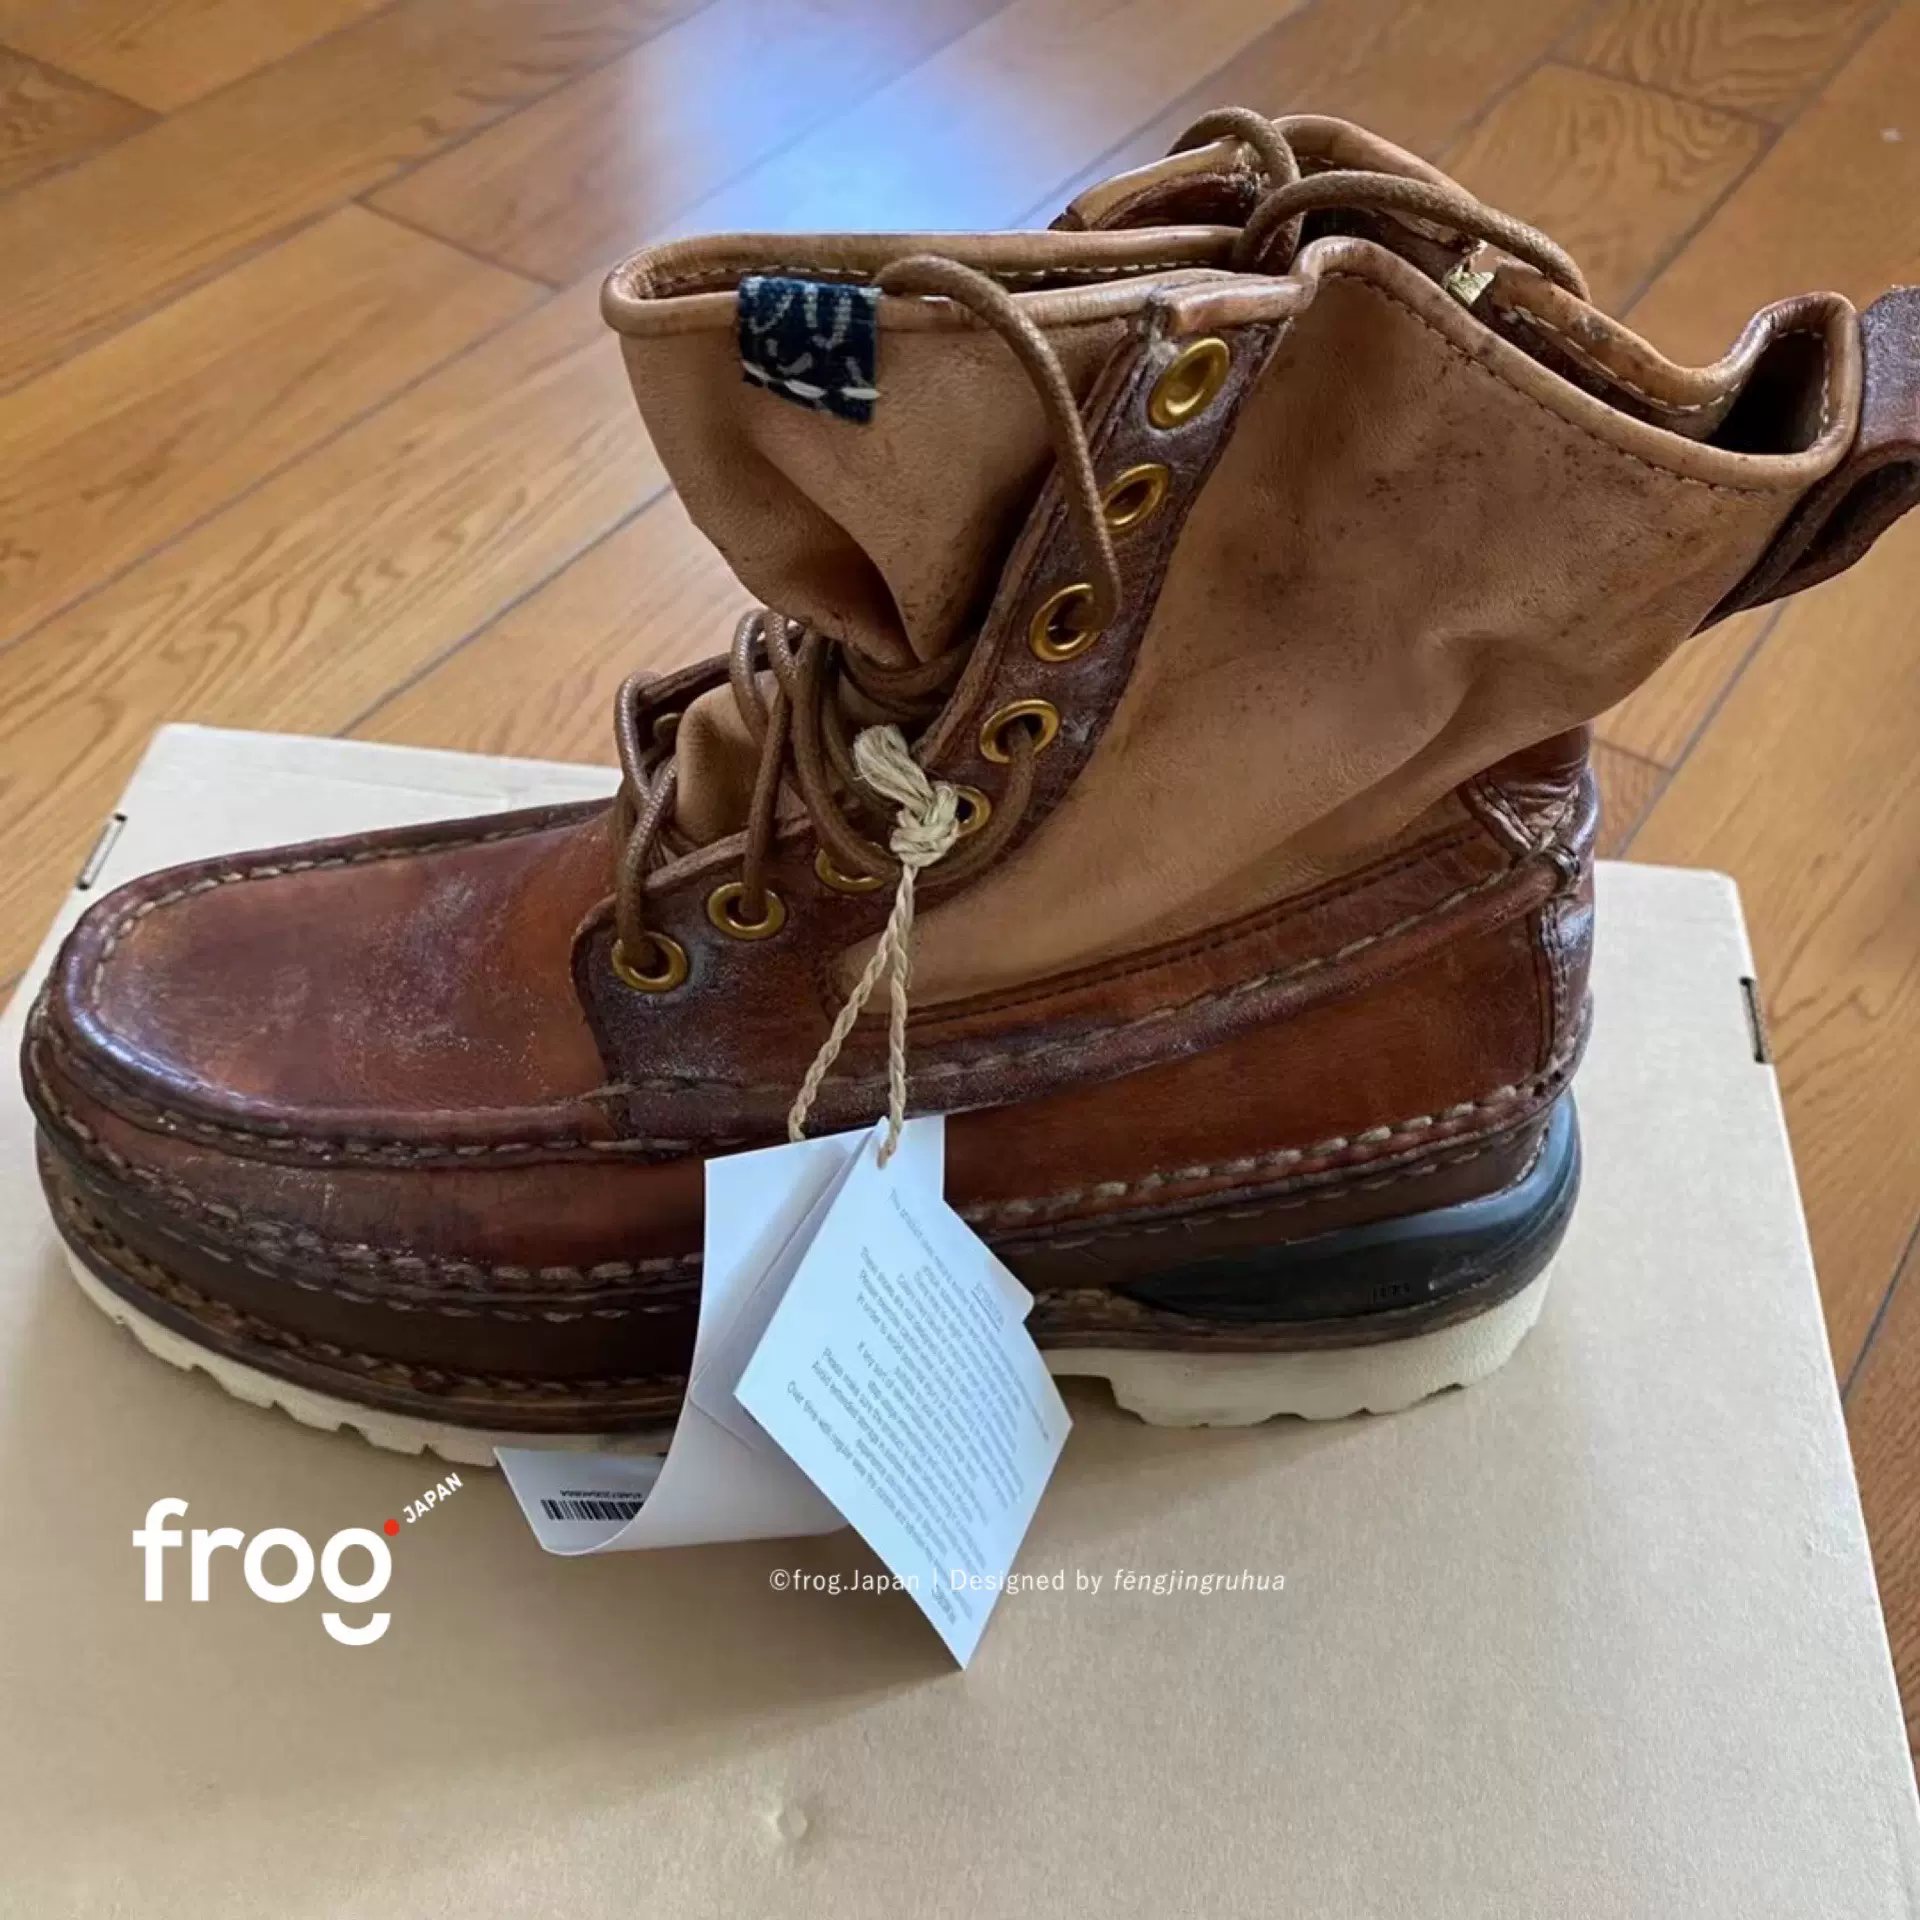 visvim ICT GRIZZLY BOOTS BROWN US9 泥染め - ブーツ